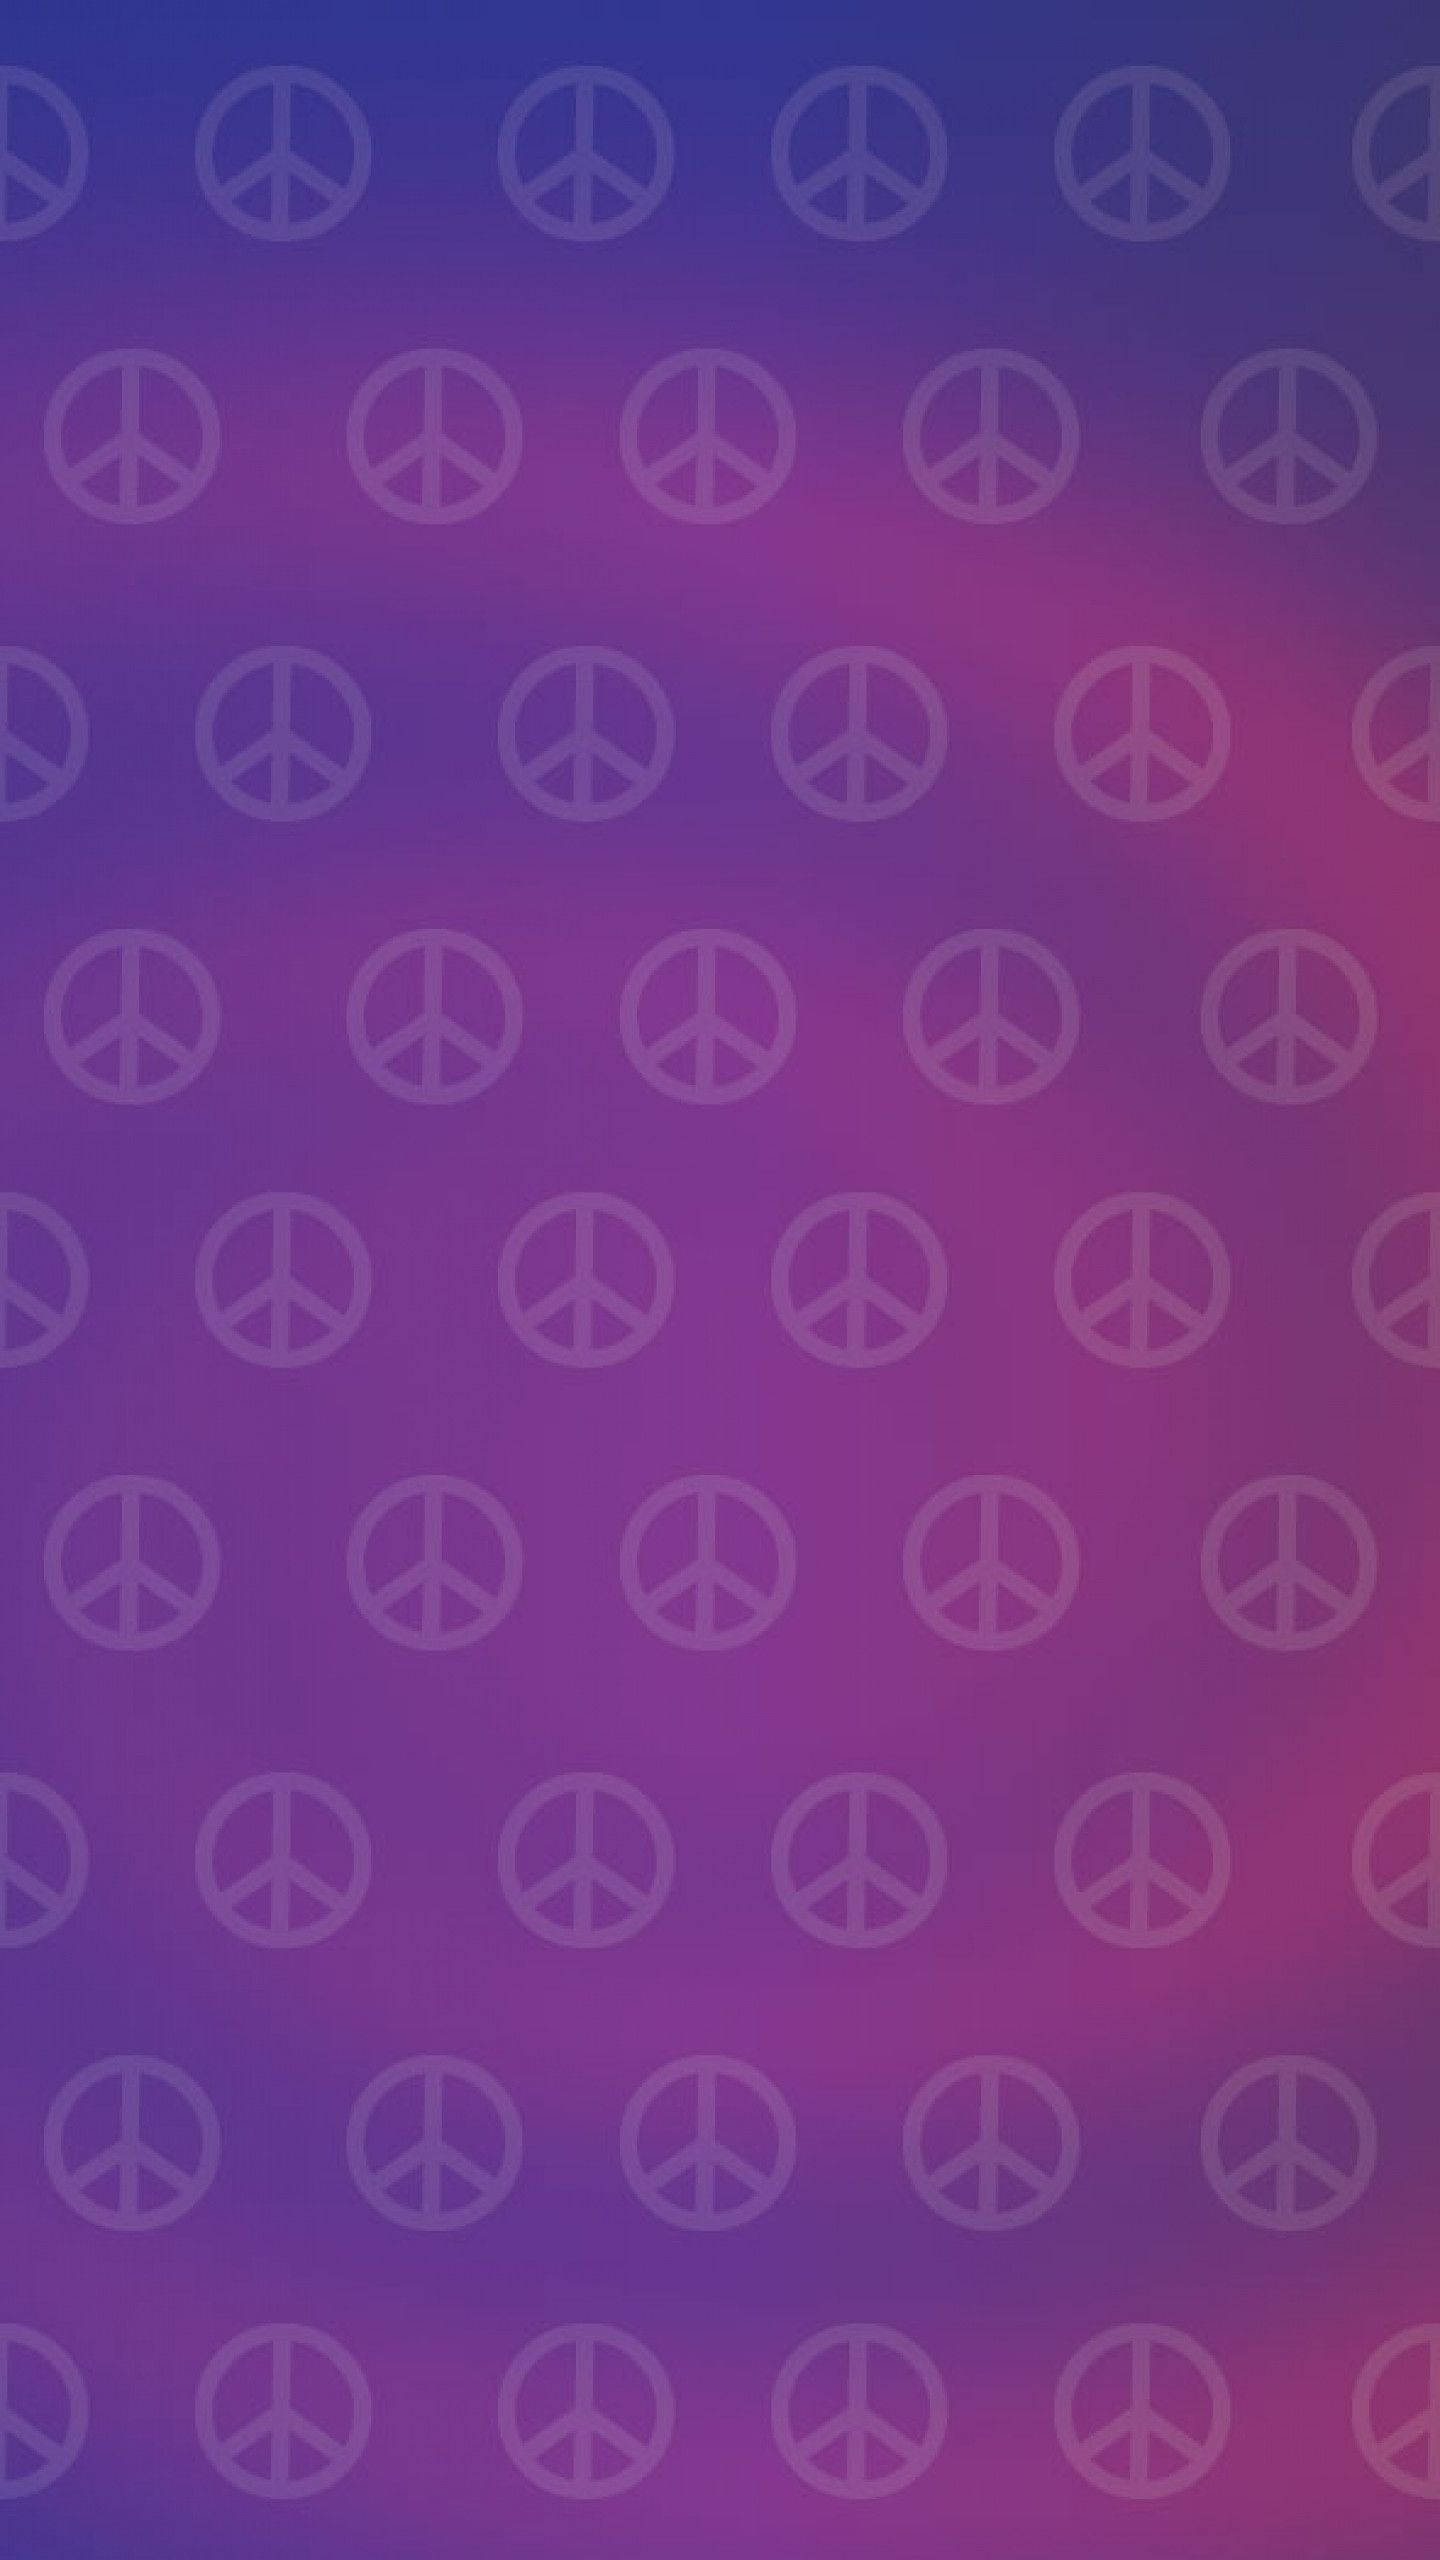 1440x2560 Download Hippie Iconic Peace Sign Wallpaper